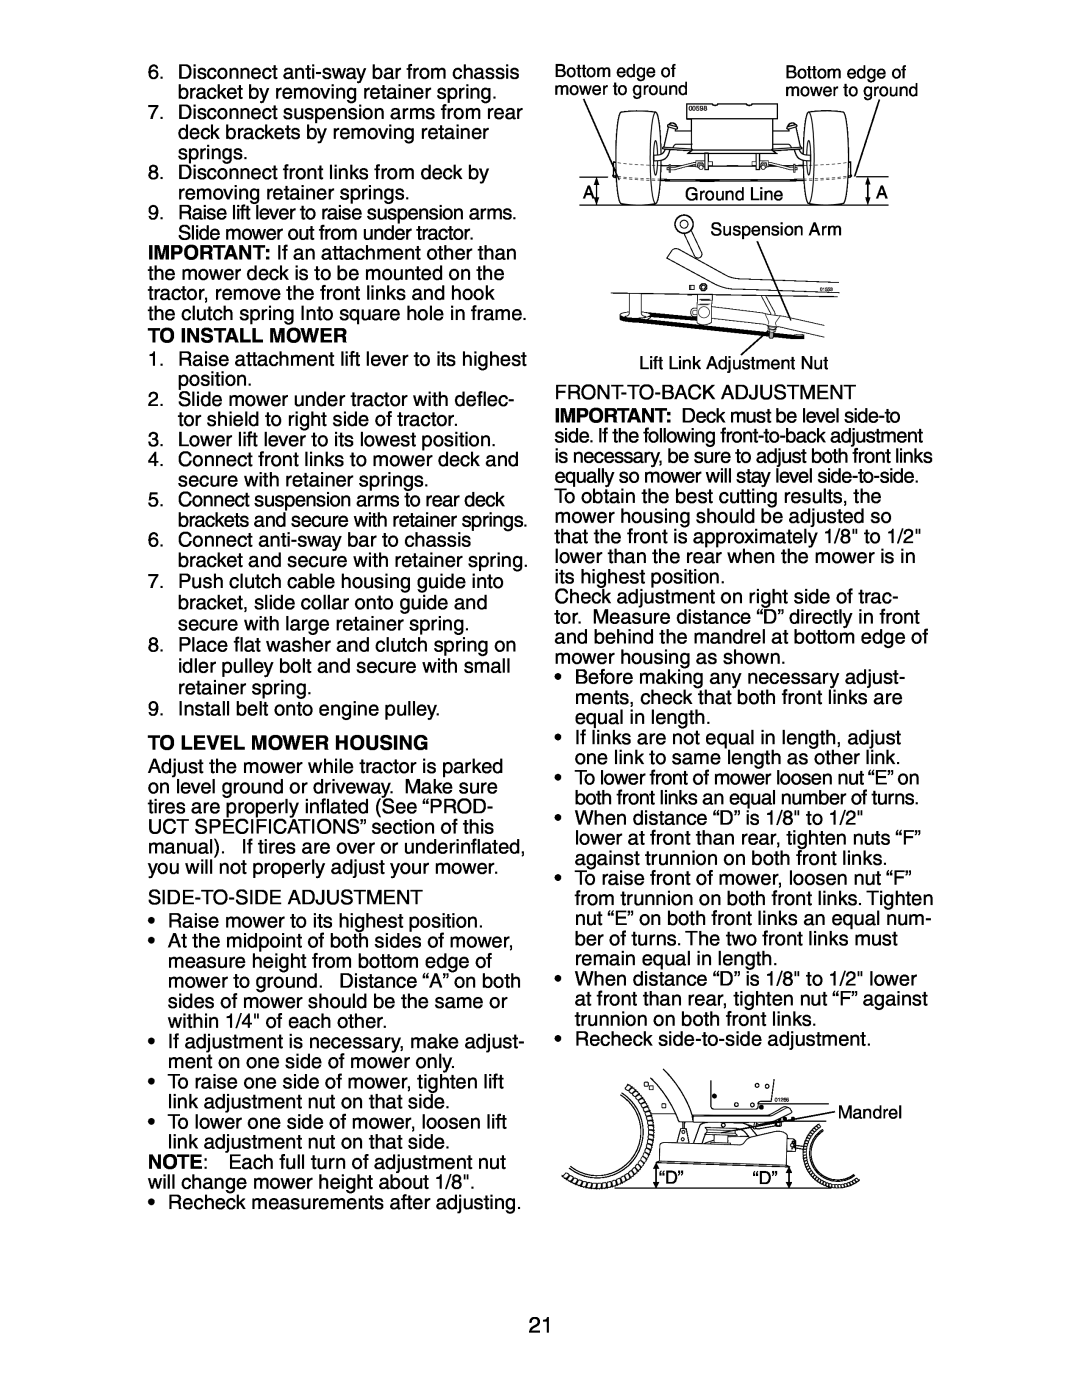 Poulan CO1842STA manual To Install Mower, To Level Mower Housing 